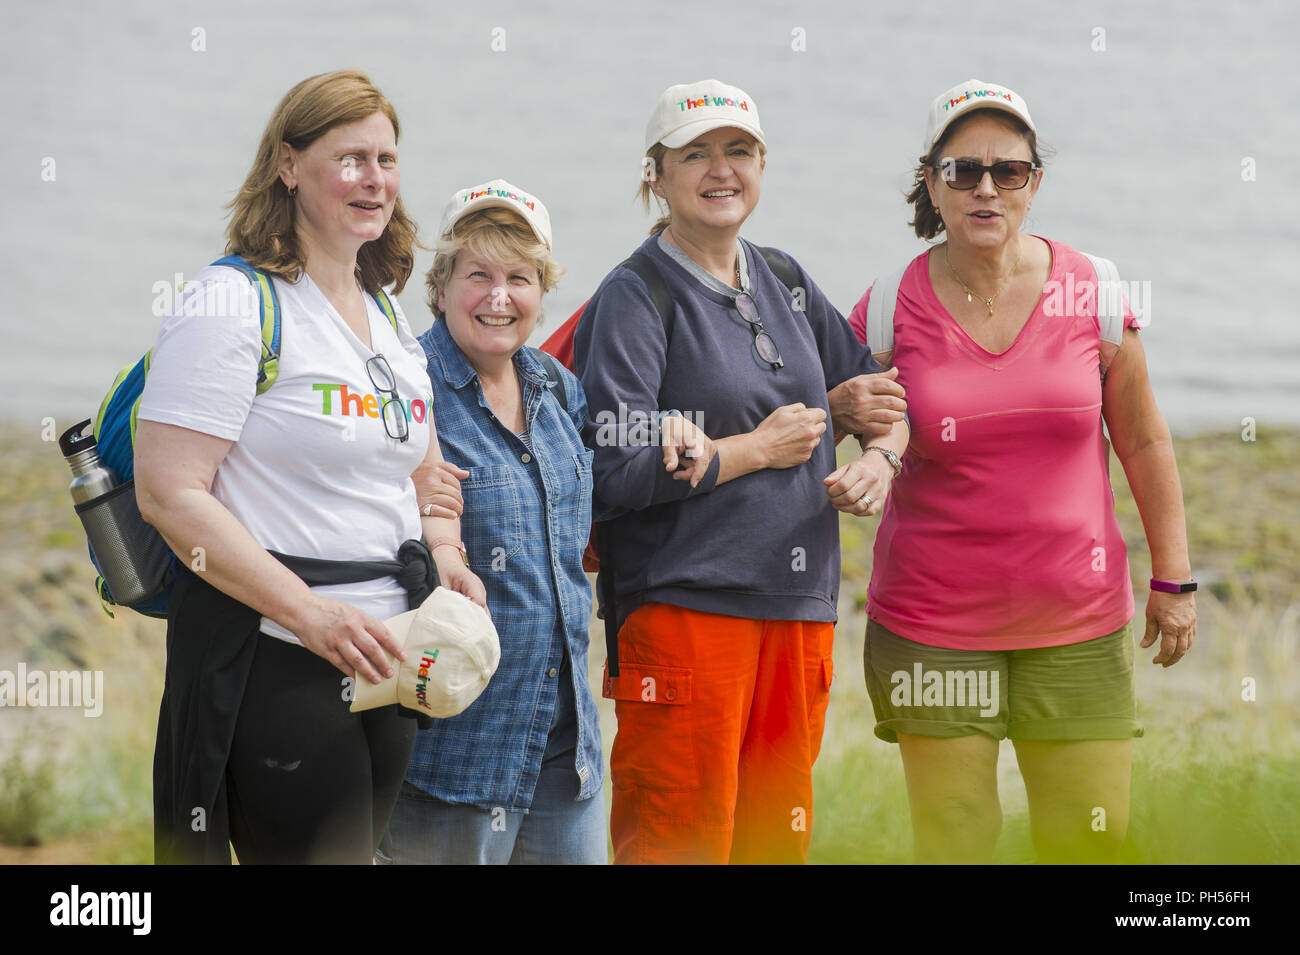 The former prime minister's wife Sarah Brown, Kathy Lette, Arabella Weir, and Sandi and Debbie Toksvig take a break Silver Sands on a five-day charity walk to raise money for girls’ education and safe schools.  Featuring: Arabella Weir, Debbie Toksvig, Sandi Toksvig, Sarah Brown Where: Aberdour, United Kingdom When: 30 Jul 2018 Credit: Euan Cherry/WENN Stock Photo